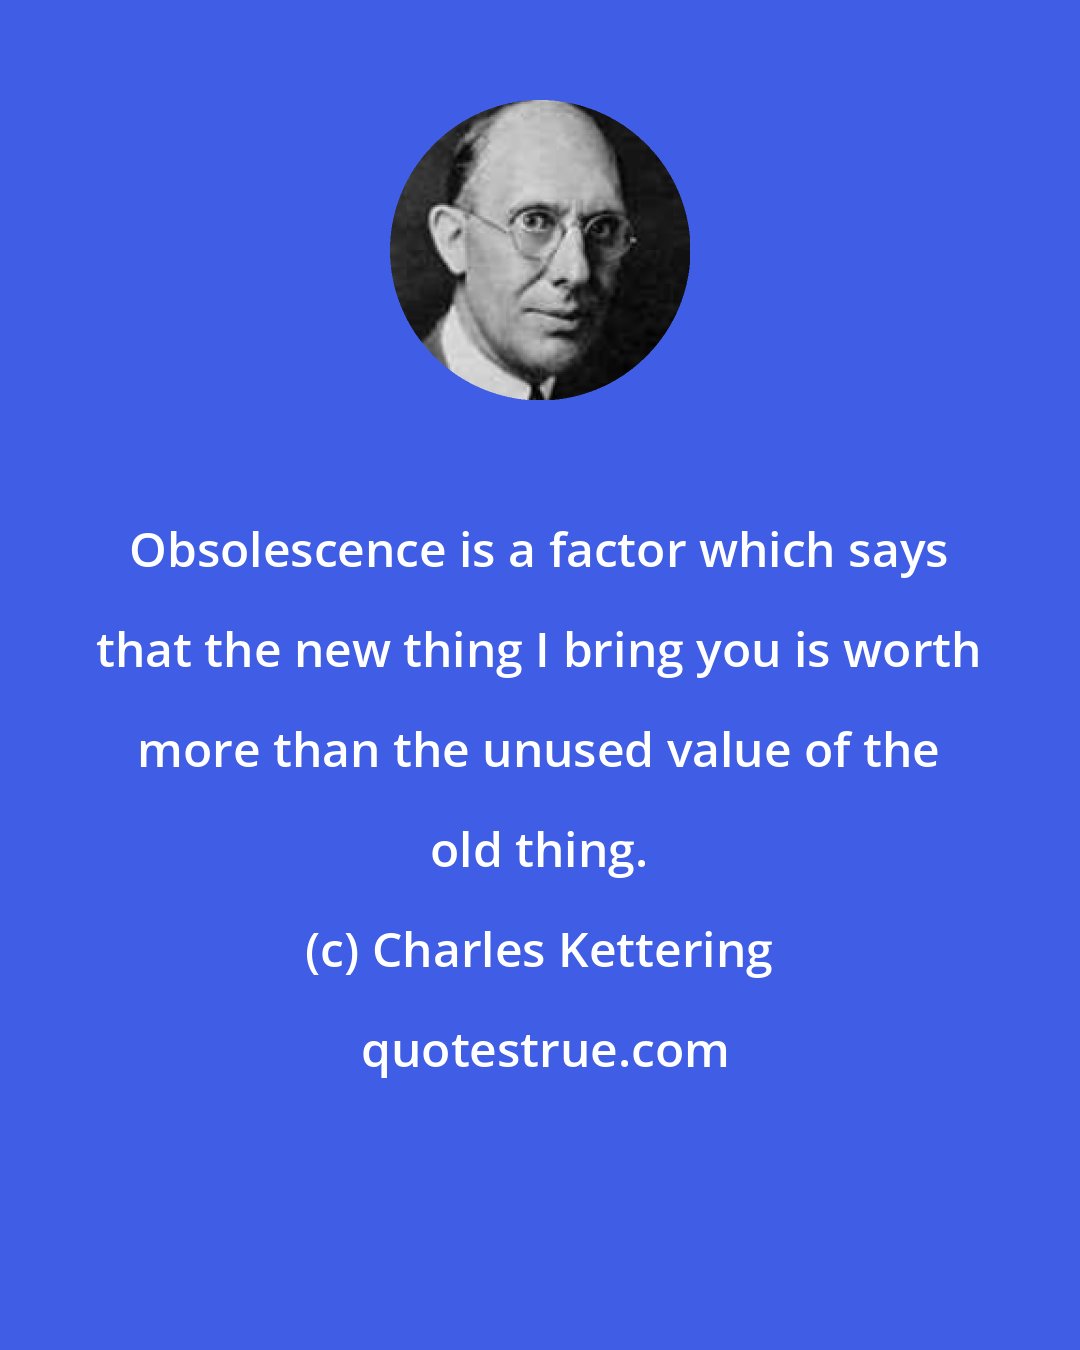 Charles Kettering: Obsolescence is a factor which says that the new thing I bring you is worth more than the unused value of the old thing.